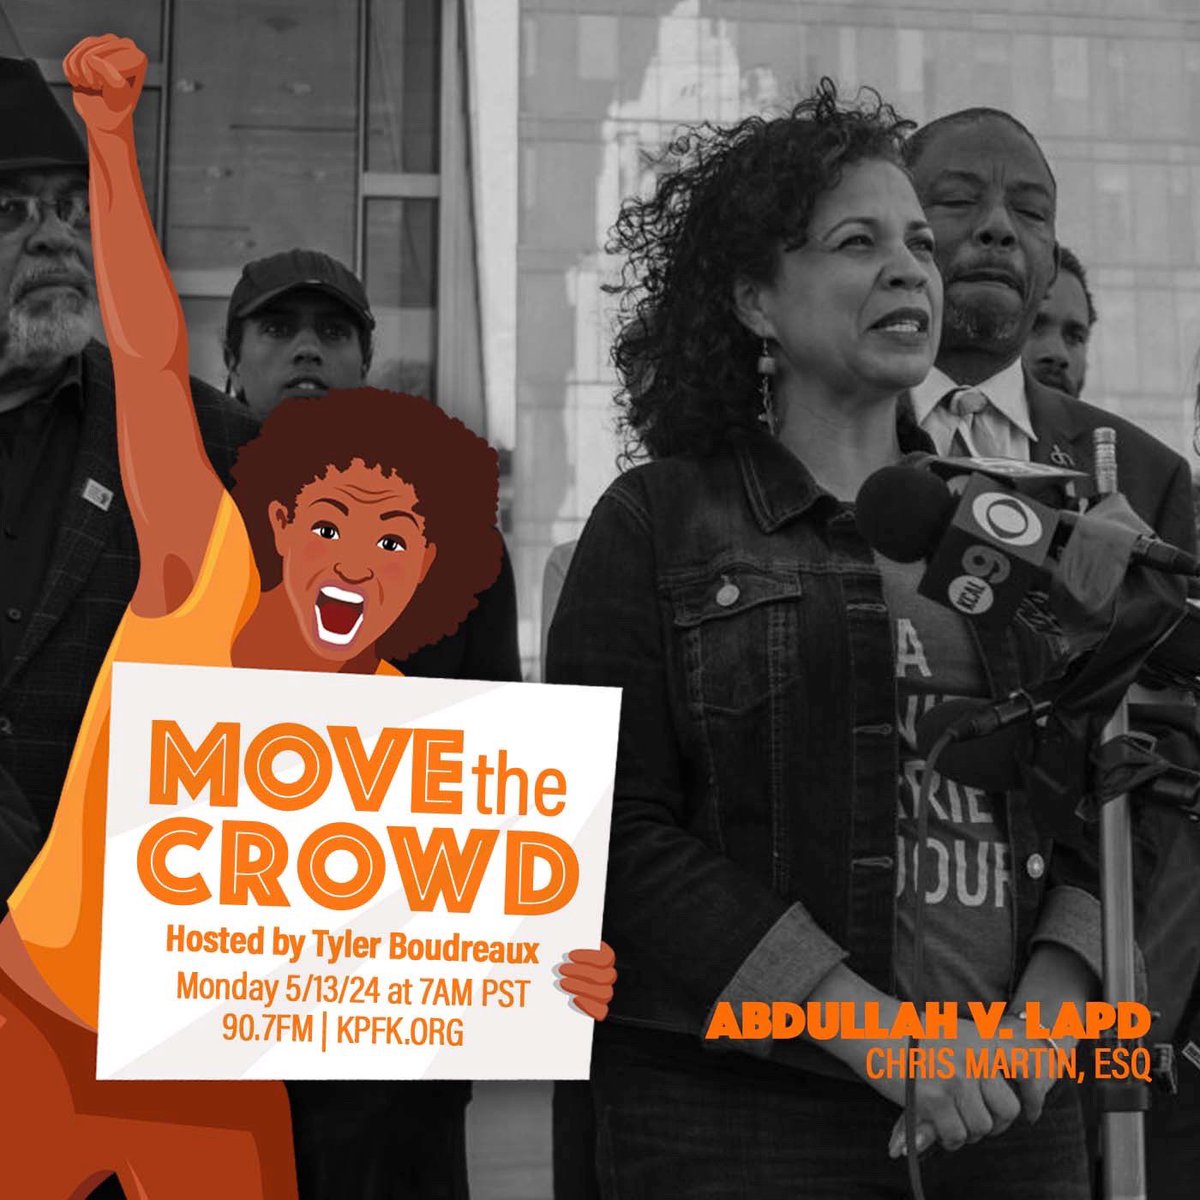 ✊🏾On this week’s #MoveTheCrowd, Tyler Boudreaux hosts a conversation with attorney Chris Martin about @docmellymel’s trial against LAPD for the 2021 swatting of her home.
📣Plus headlines + CTA with co-host Baba Akili

MONDAY 5/13/24 @ 7AM
📻90.7FM @KPFK & KPFK.org